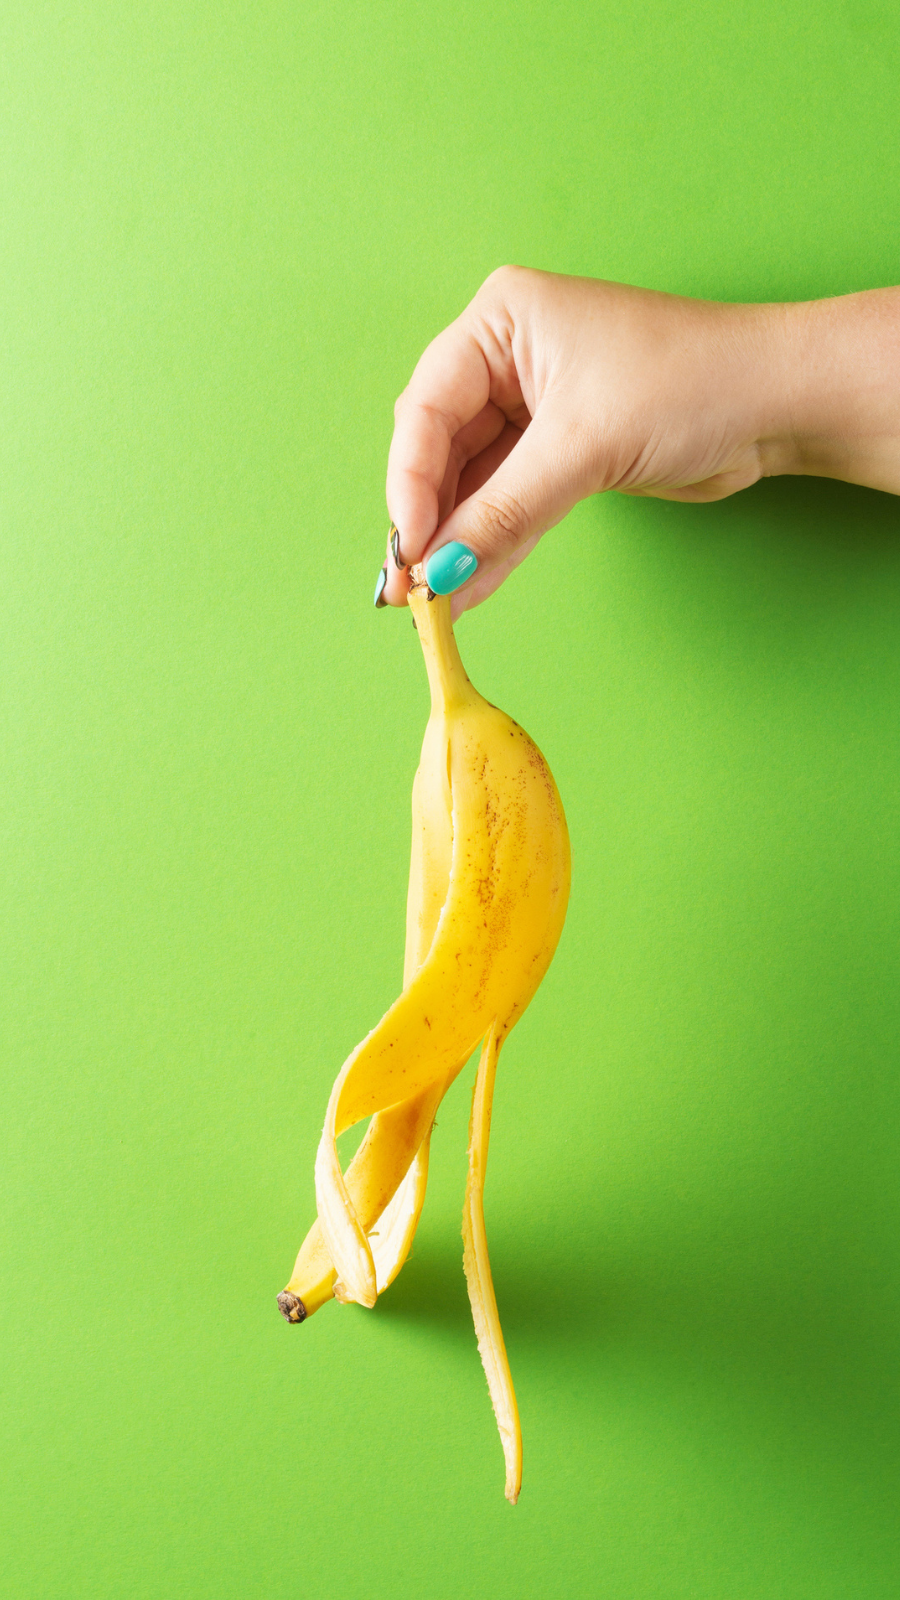 Stop throwing banana peels; Here's how you can put them to good use